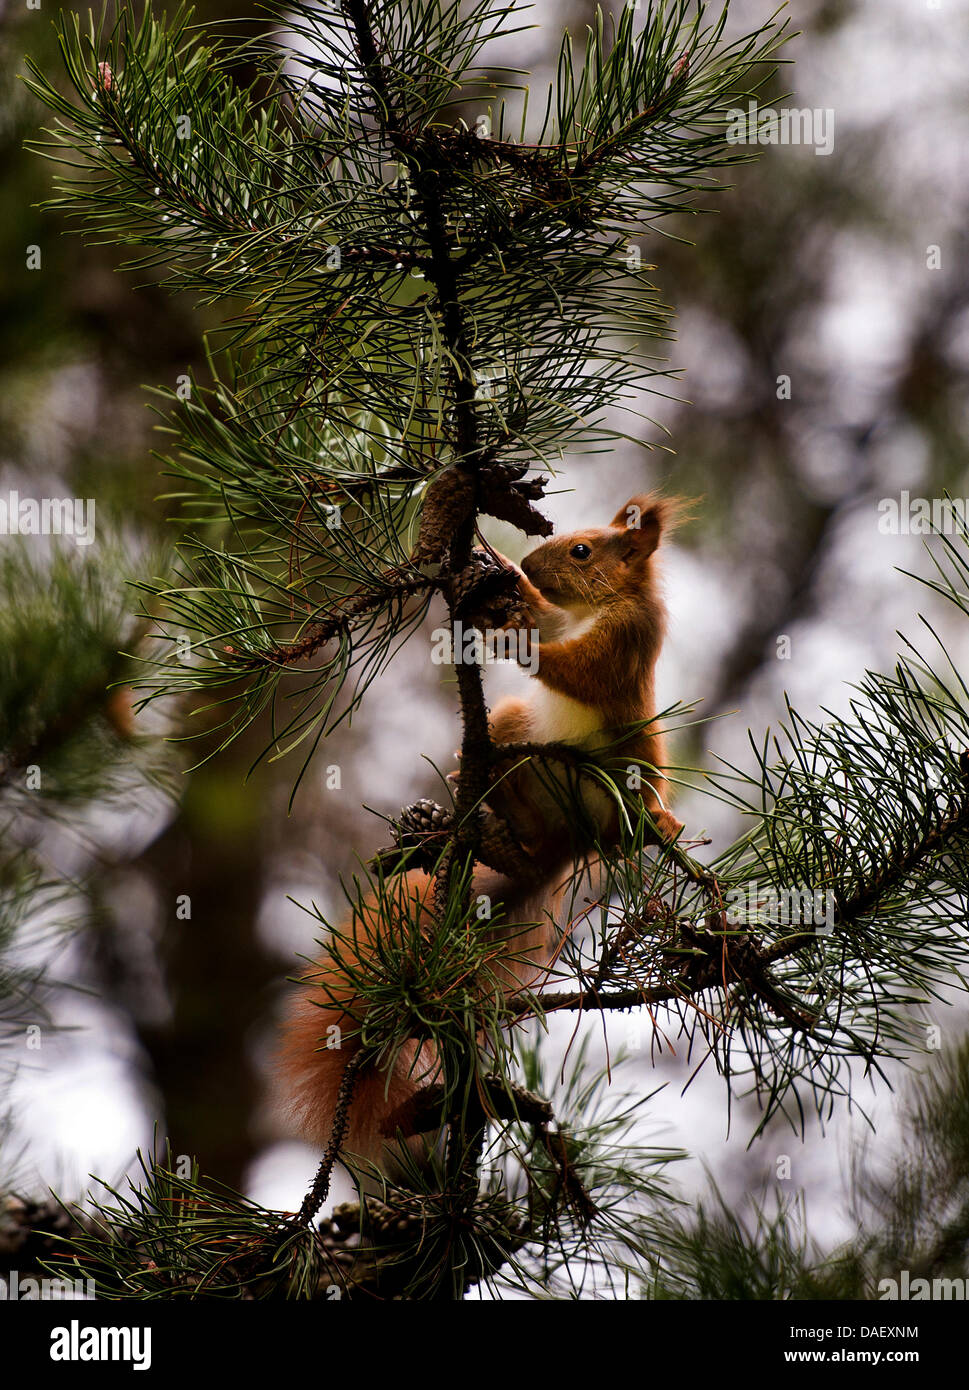 A squirrel sits on the branch of a pine tree and munches a pine cone in Dresden, Germany, 19 November 2011. With winter approaching, squirrels are collection food for winter. Phtoo: ARNO BURGI Stock Photo